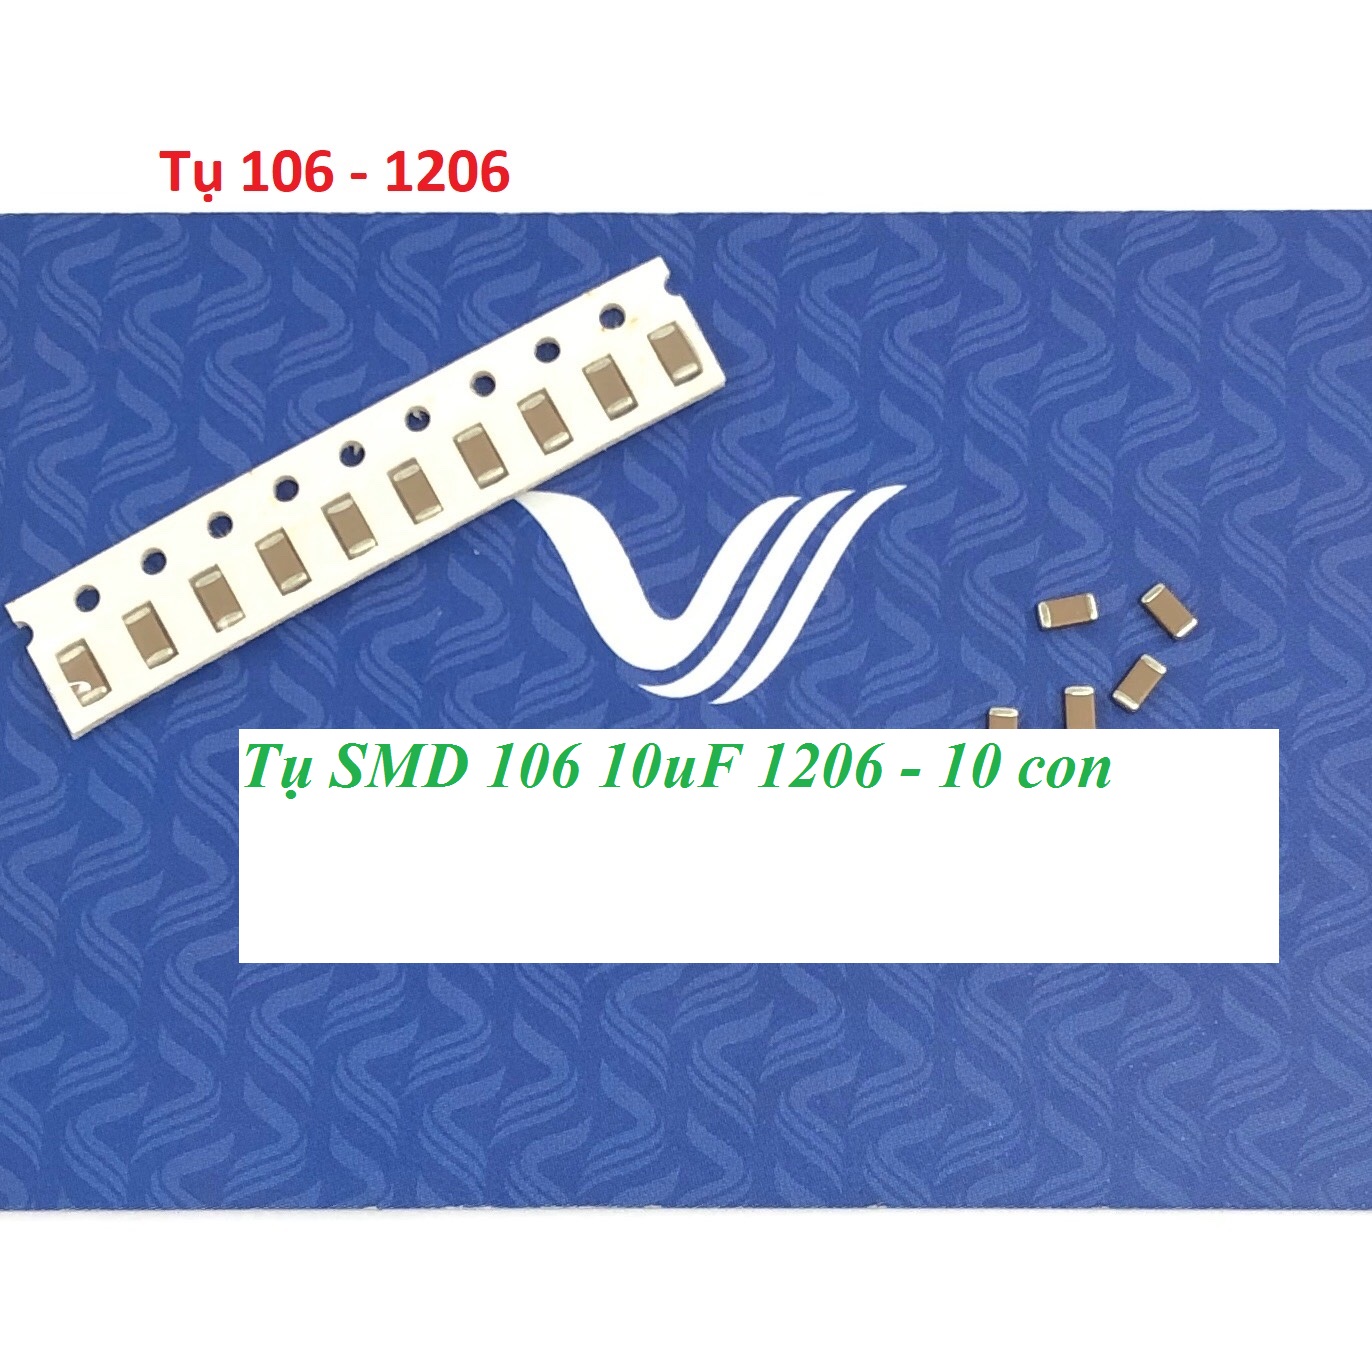 Tụ SMD 104 100nF 1206 - 10 con